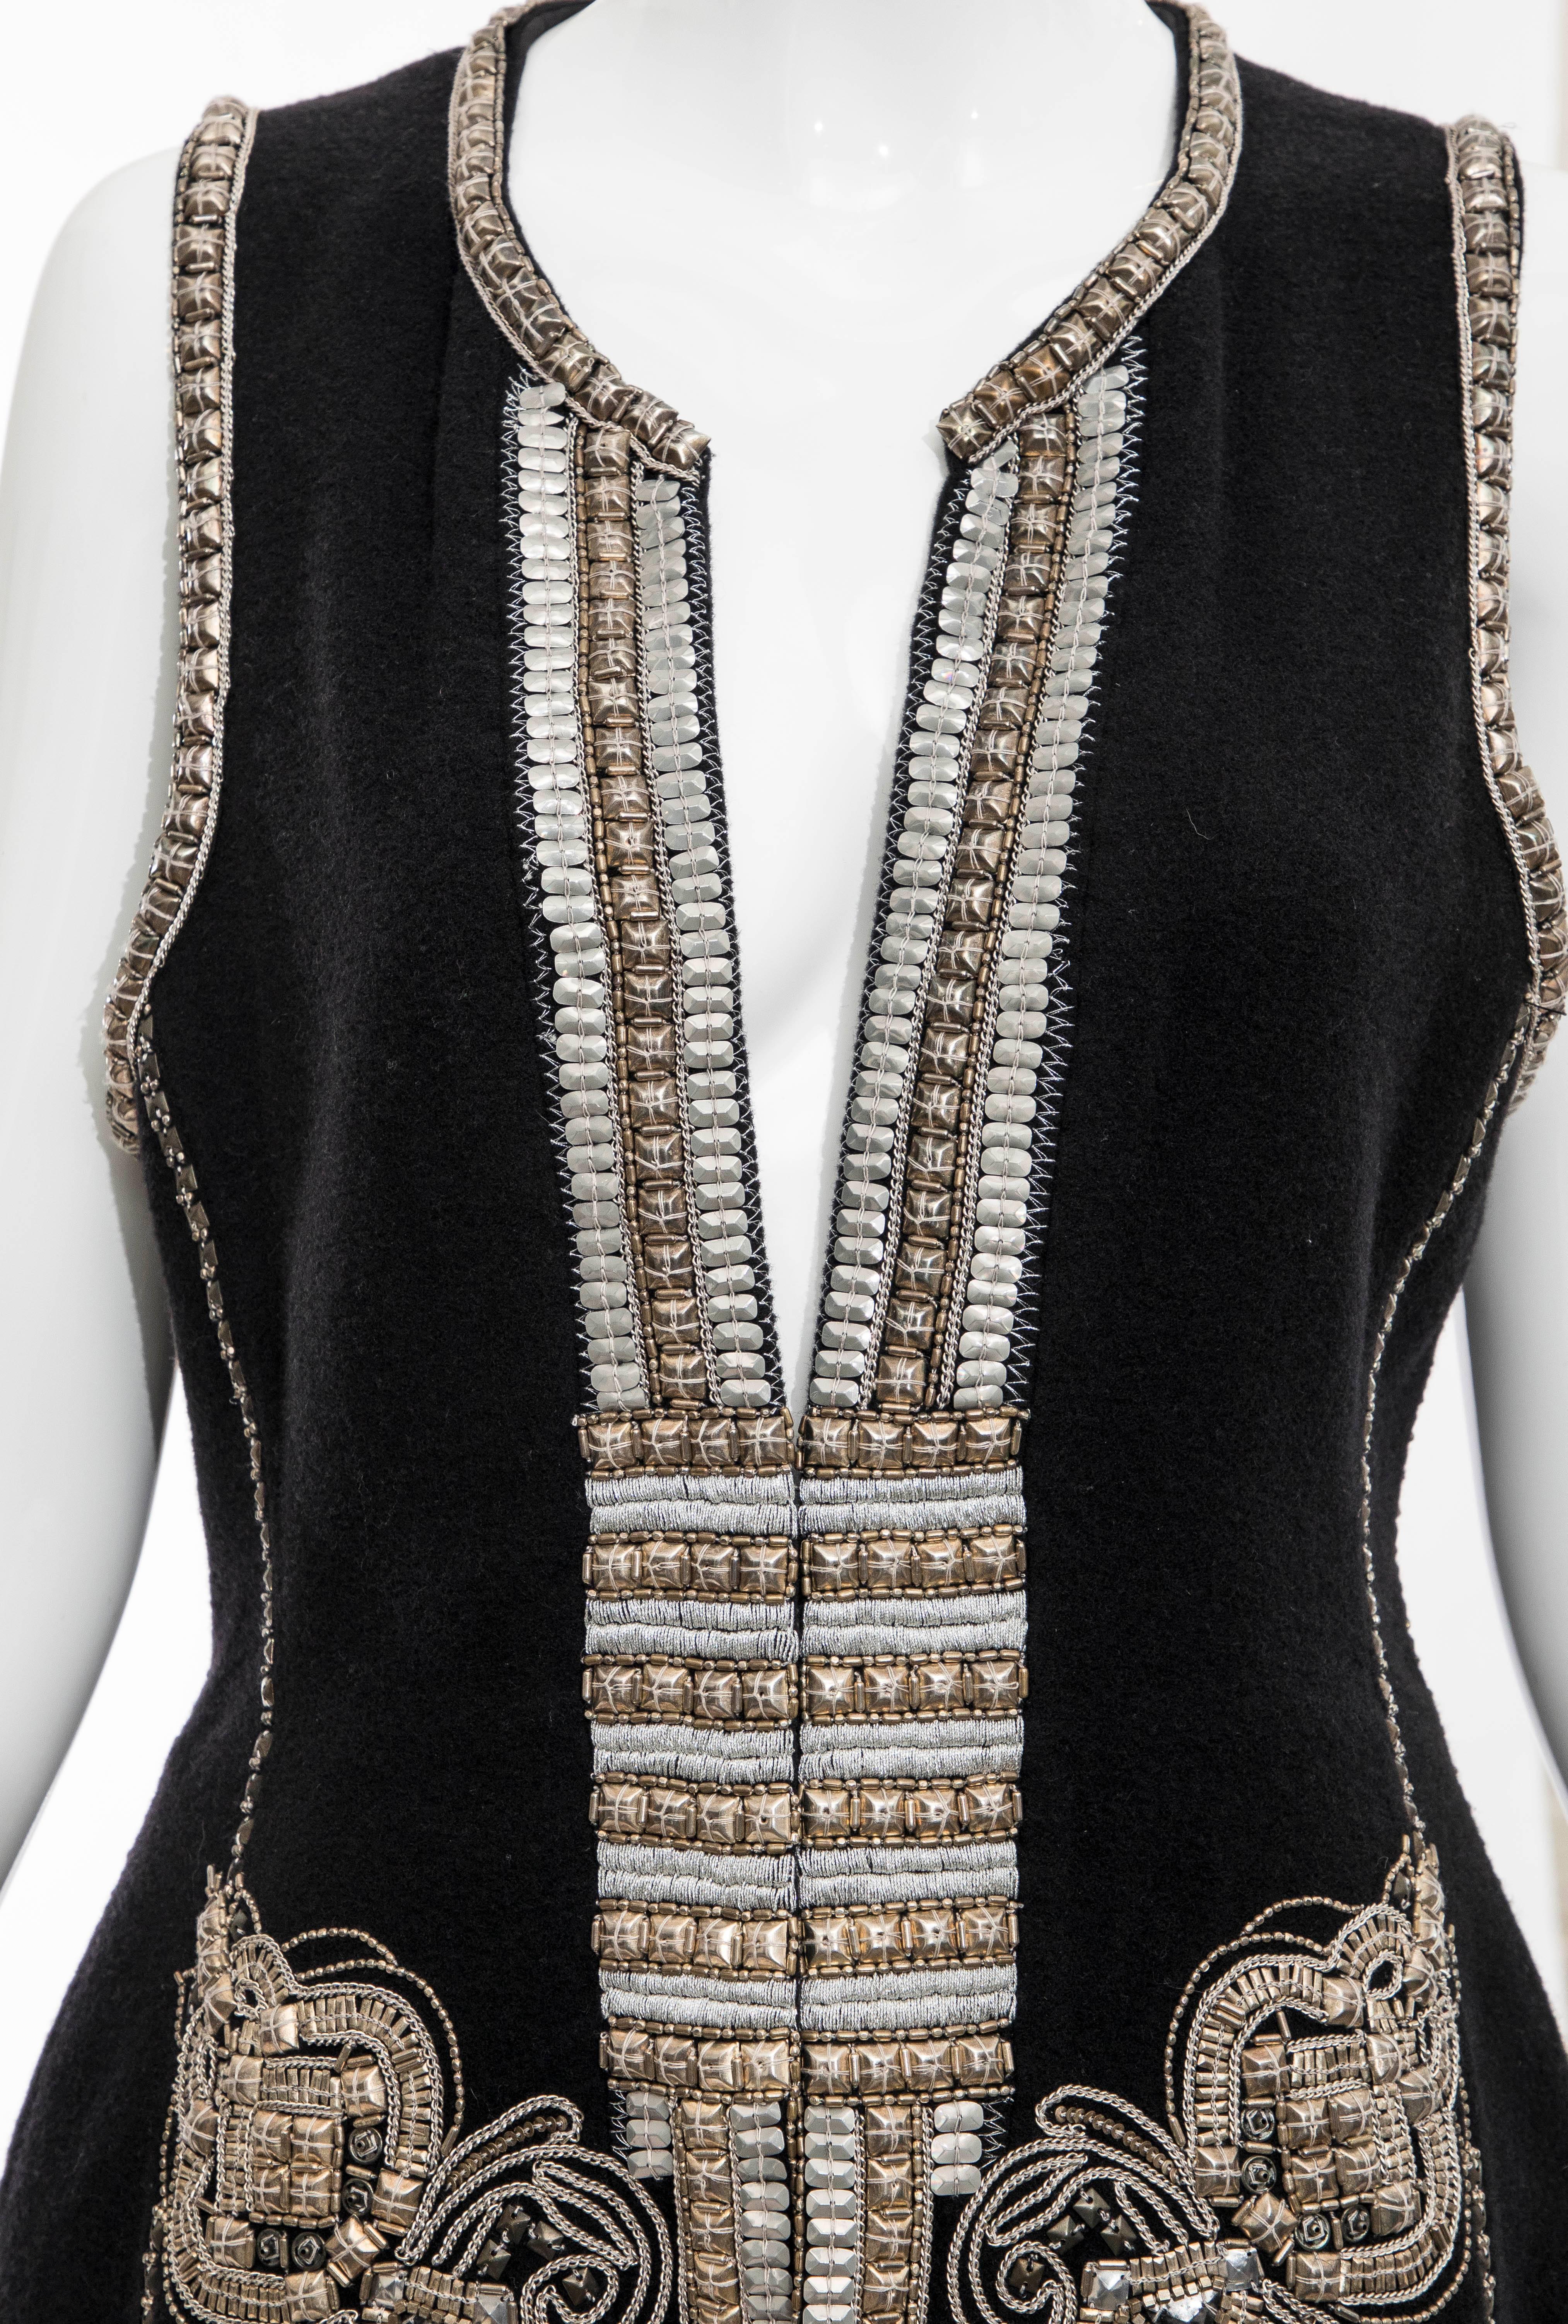 Dries Van Noten Black Wool Cashmere Silver Indian Embroidered Vest, Fall 2010 1